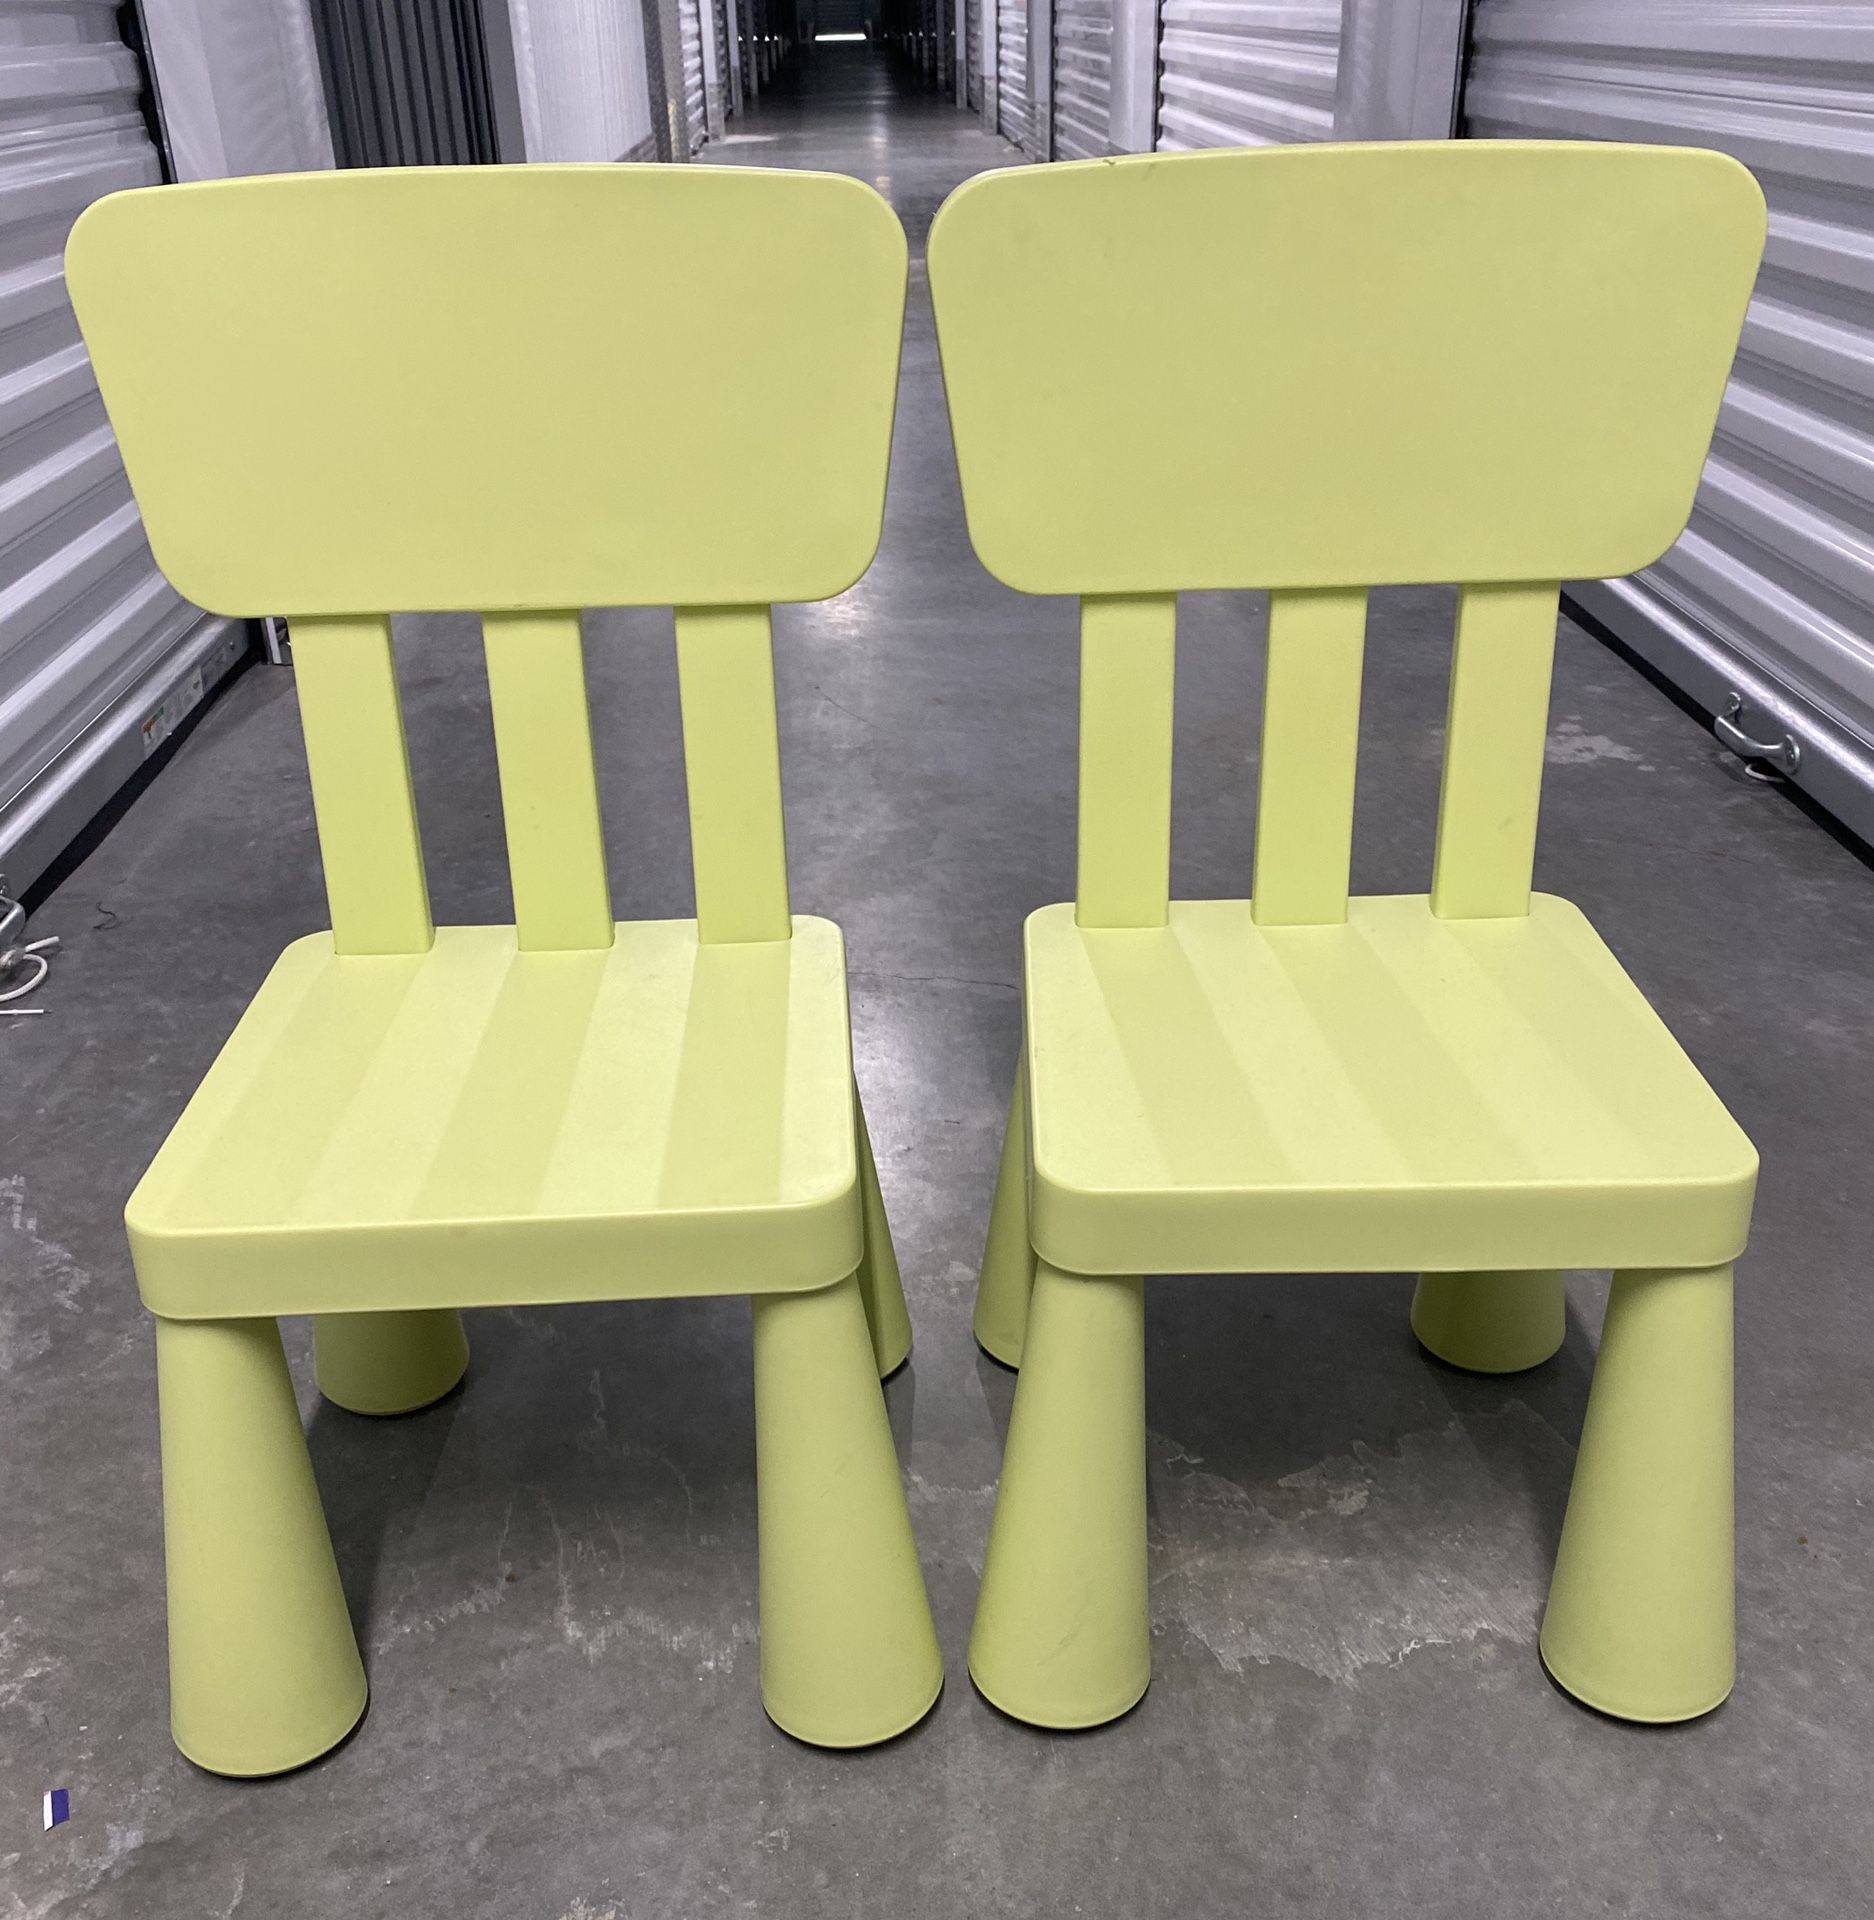 KID’S Chair (Lot of 2) ~ Pre-Owned